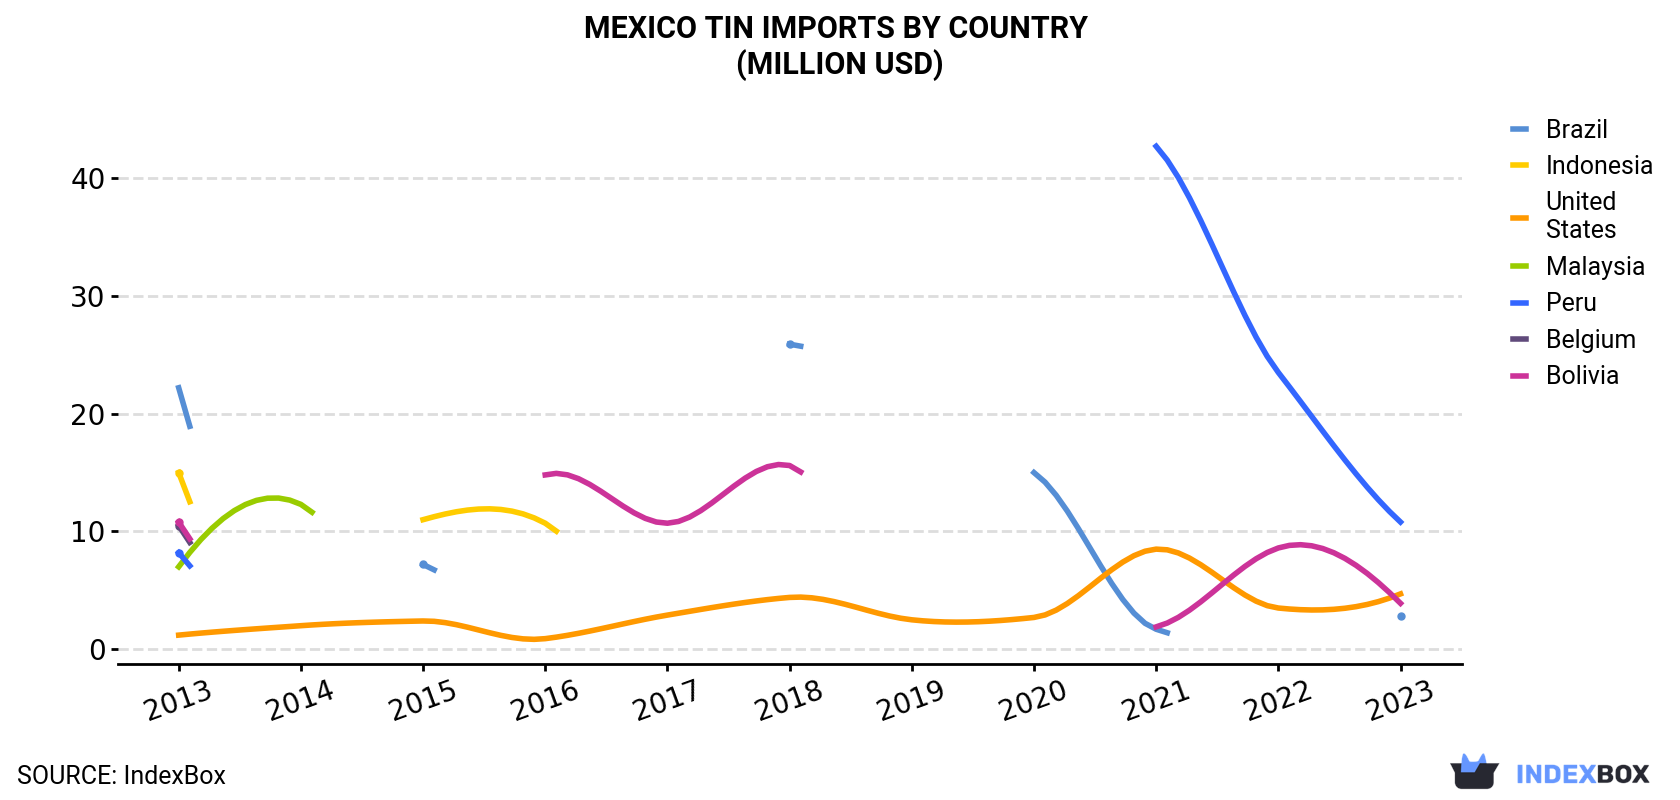 Mexico Tin Imports By Country (Million USD)